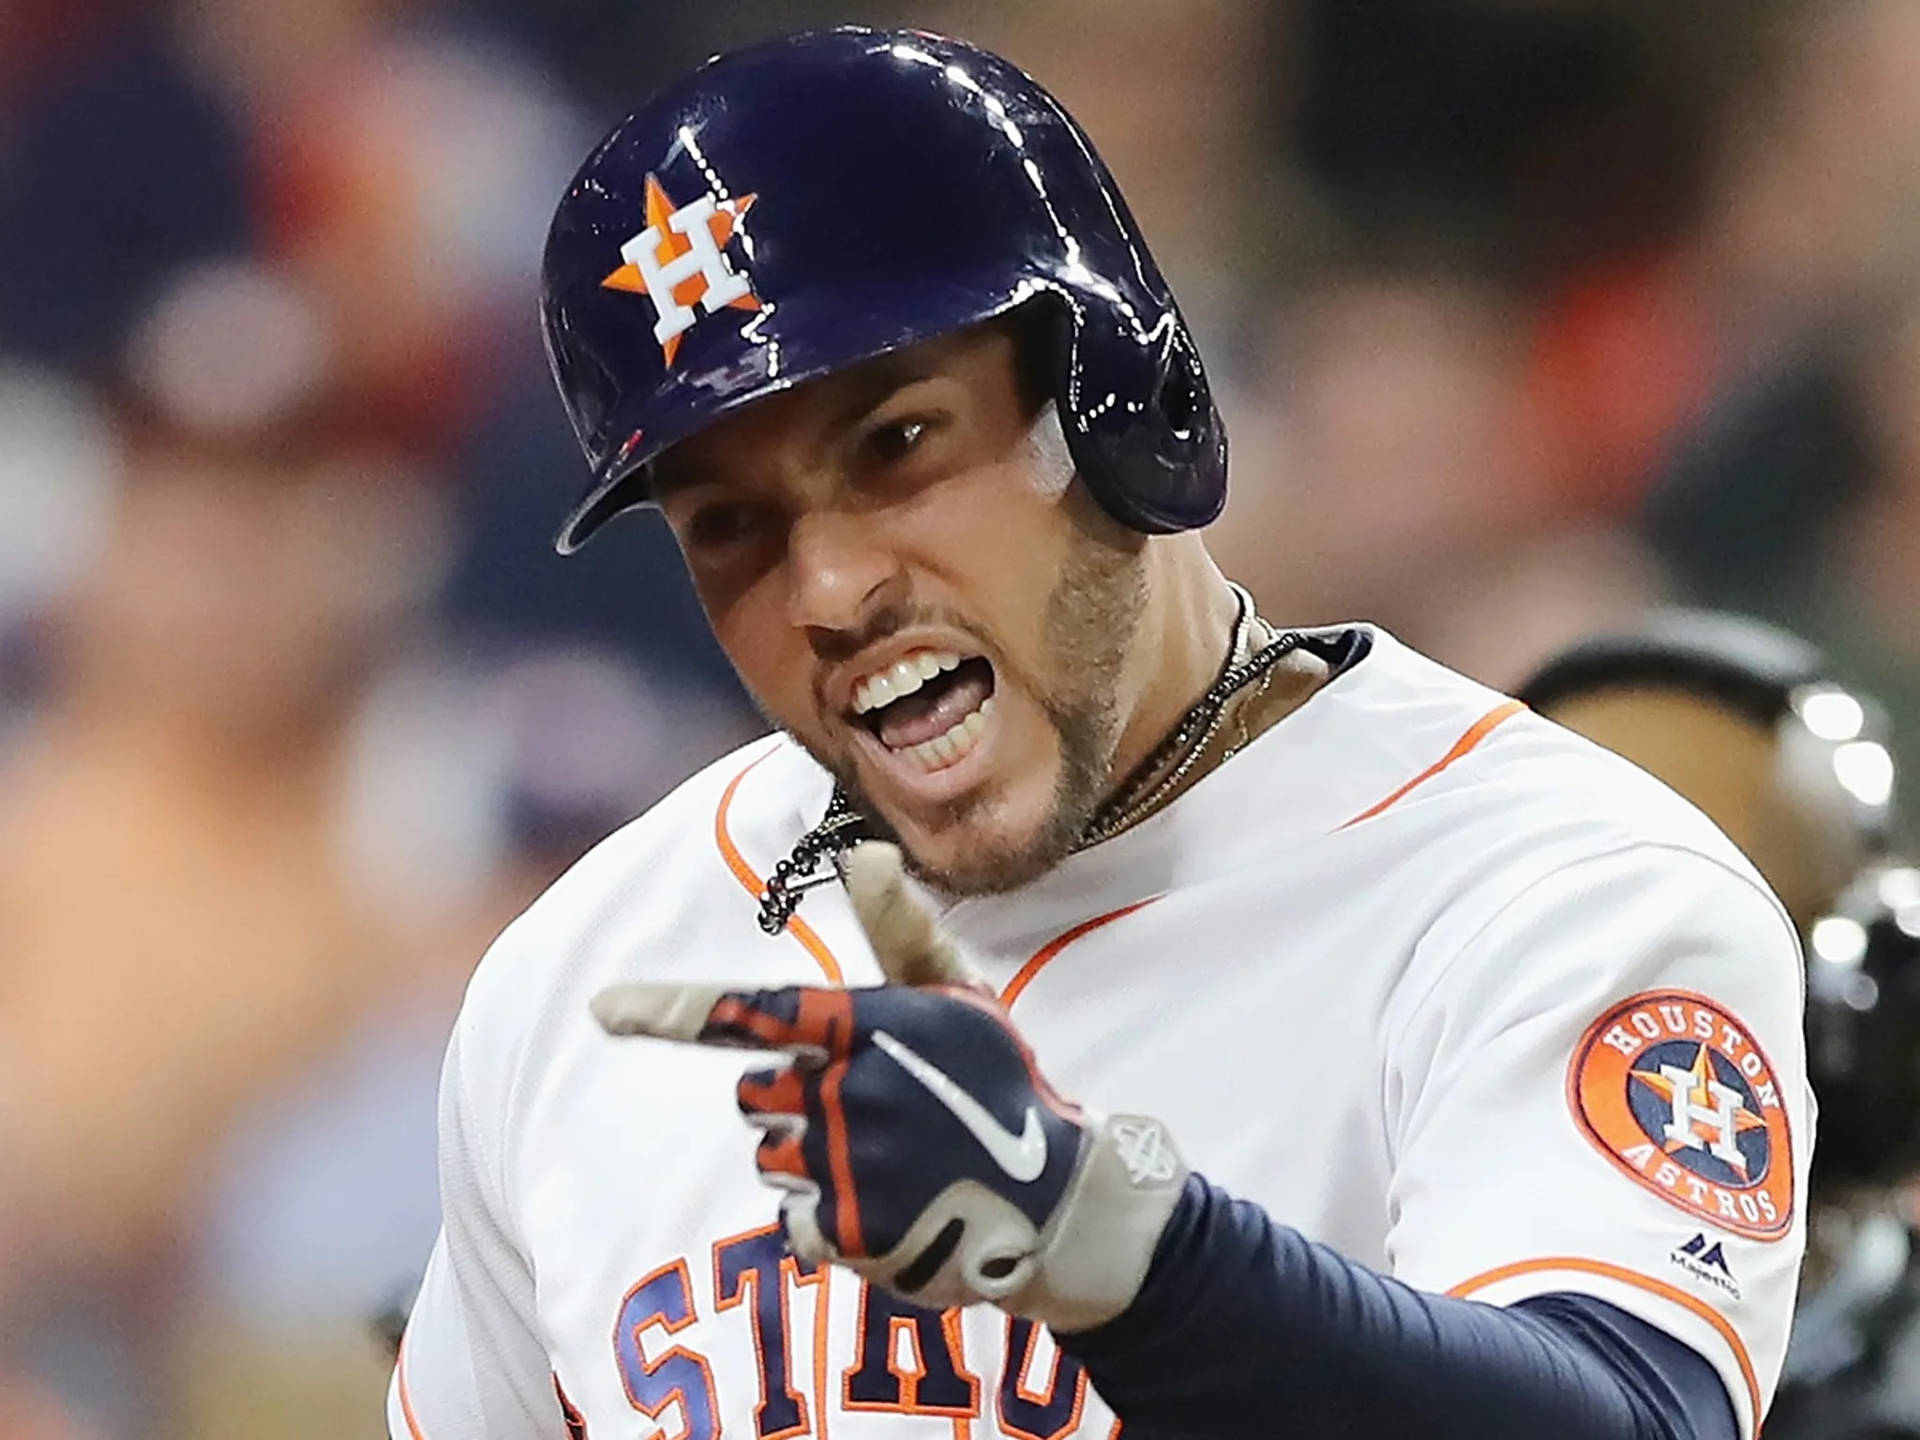 George Springer Angry Face Houston Astros Wallpaper